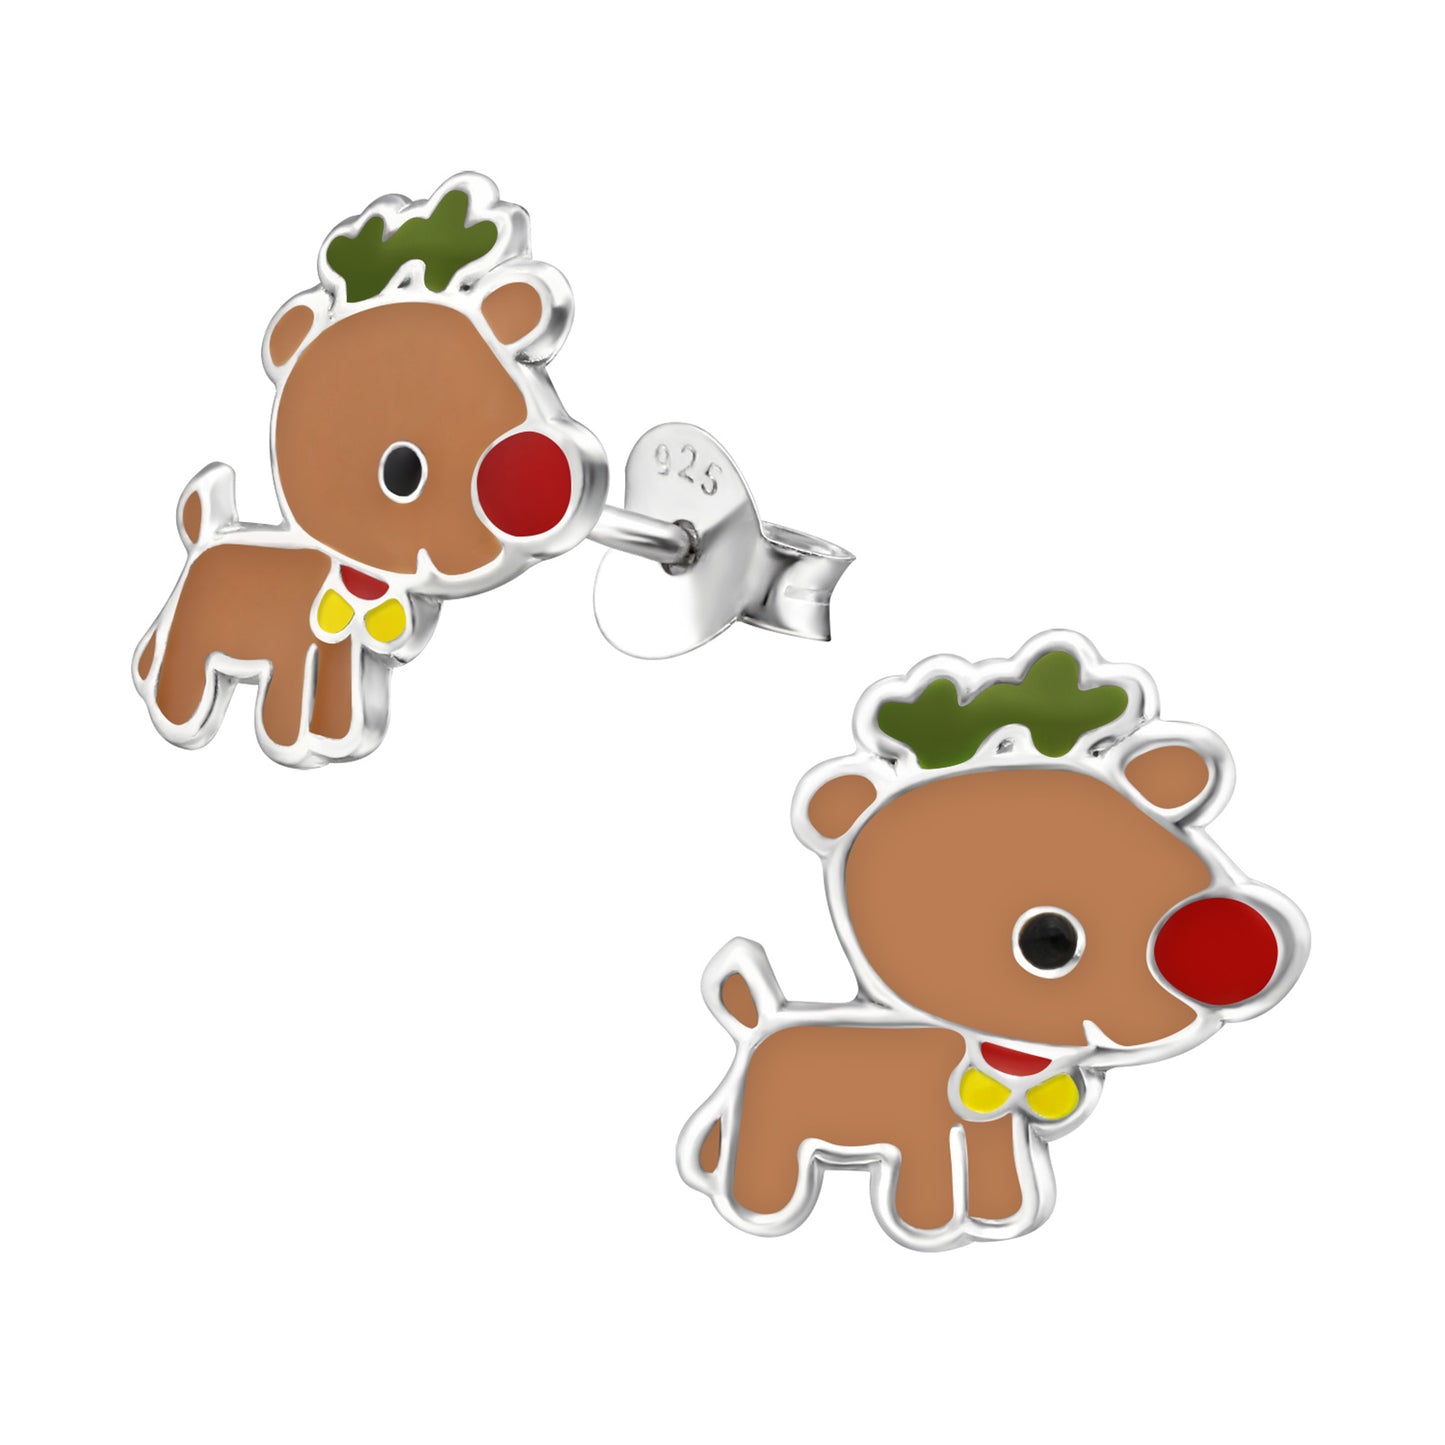 Rudolph the Red Nose Reindeer with epoxy resin detailing stud earrings.